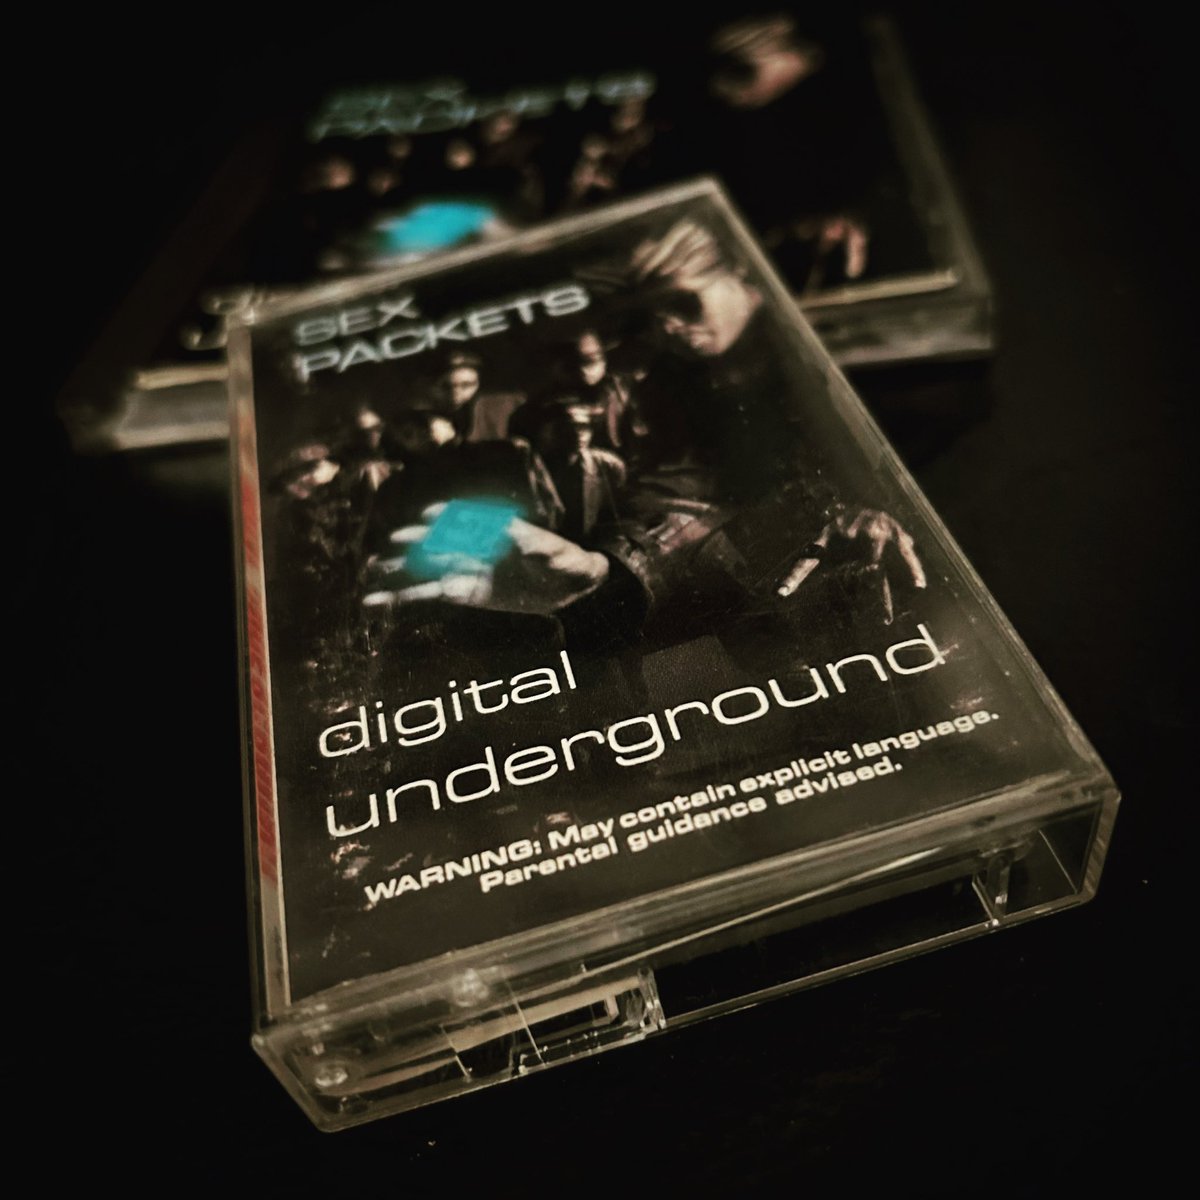 Digital Underground - Sex Packets
#hiphop #classic #cassette #cd #ripshockg #forever #celebrated #sexpackets #digitalunderground #hiphopgods